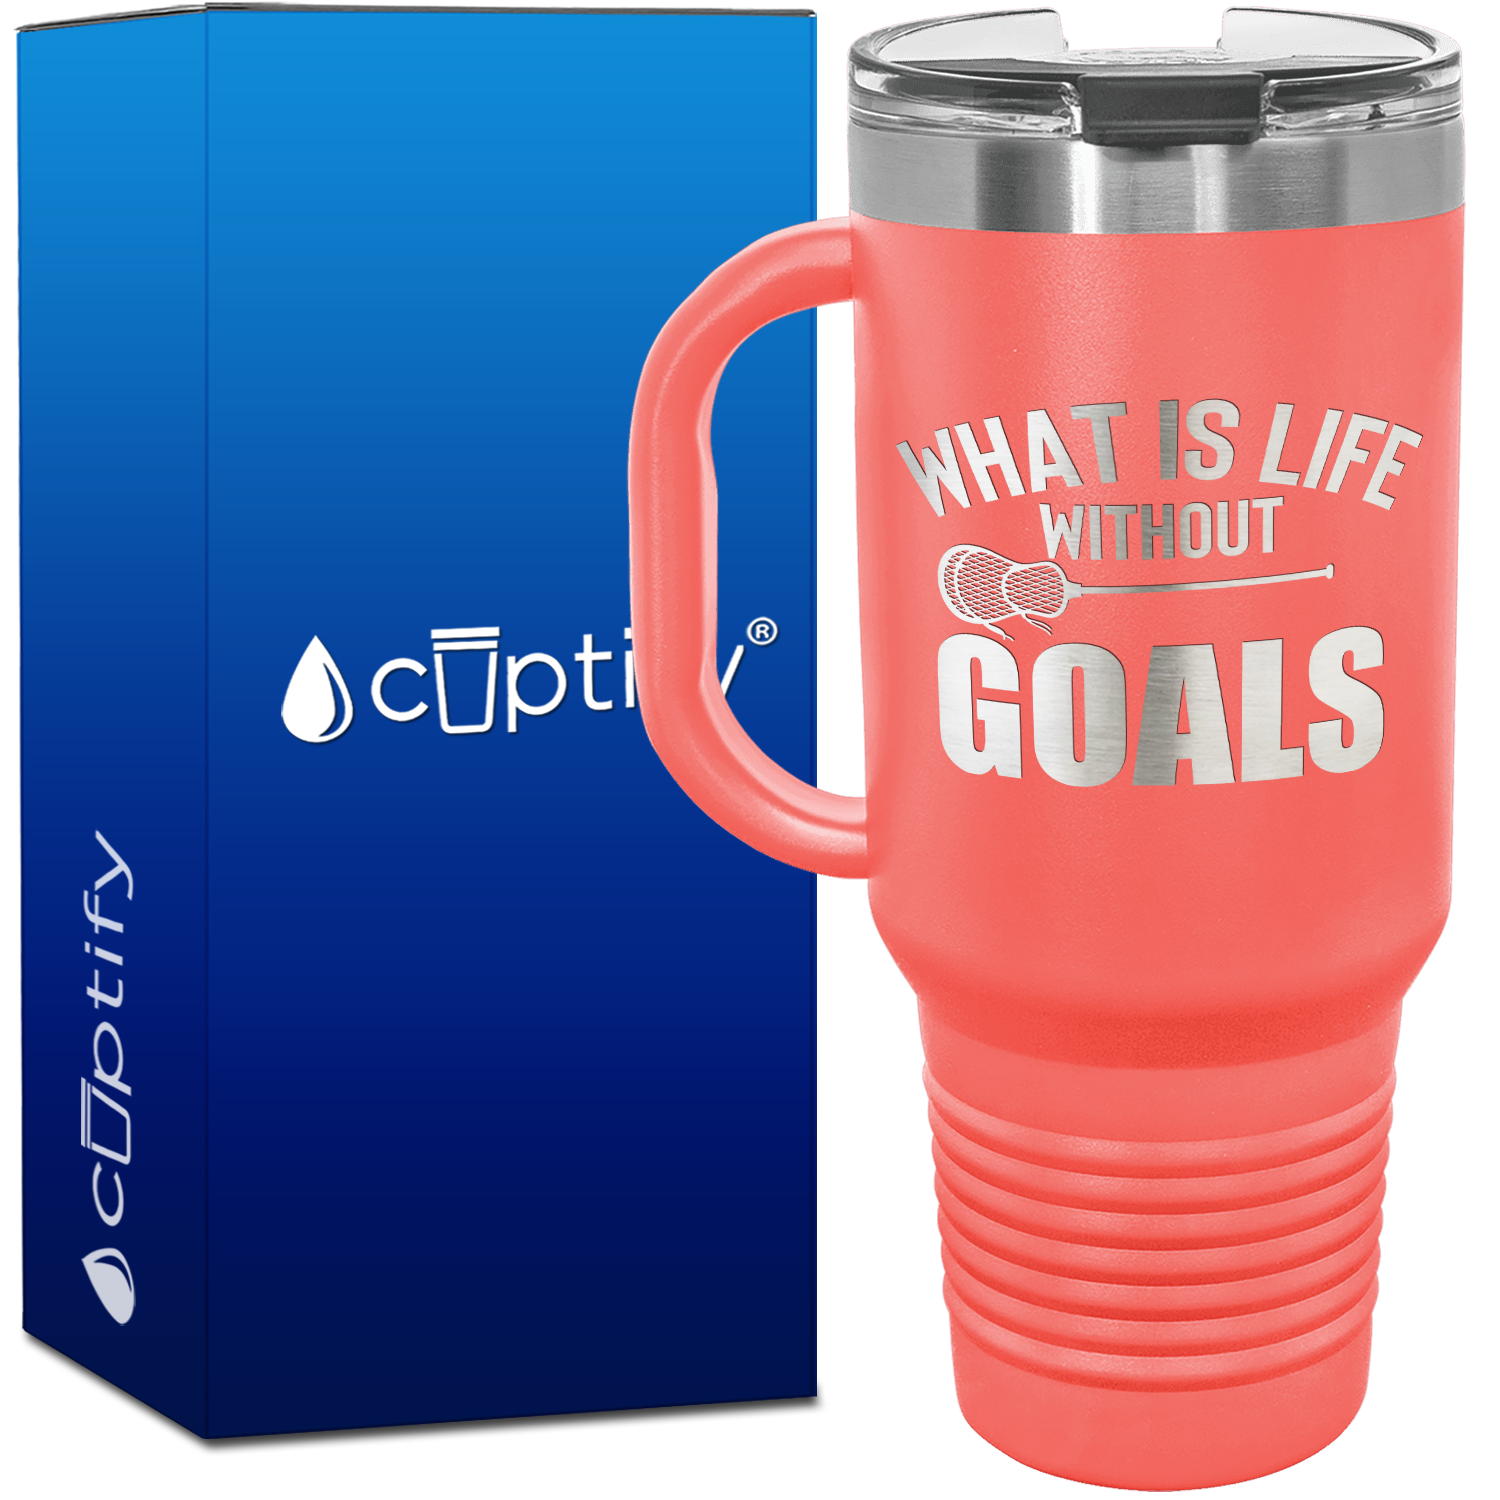 What is Life Without Goals Lacrosse Stick 40oz Lacrosse Travel Mug